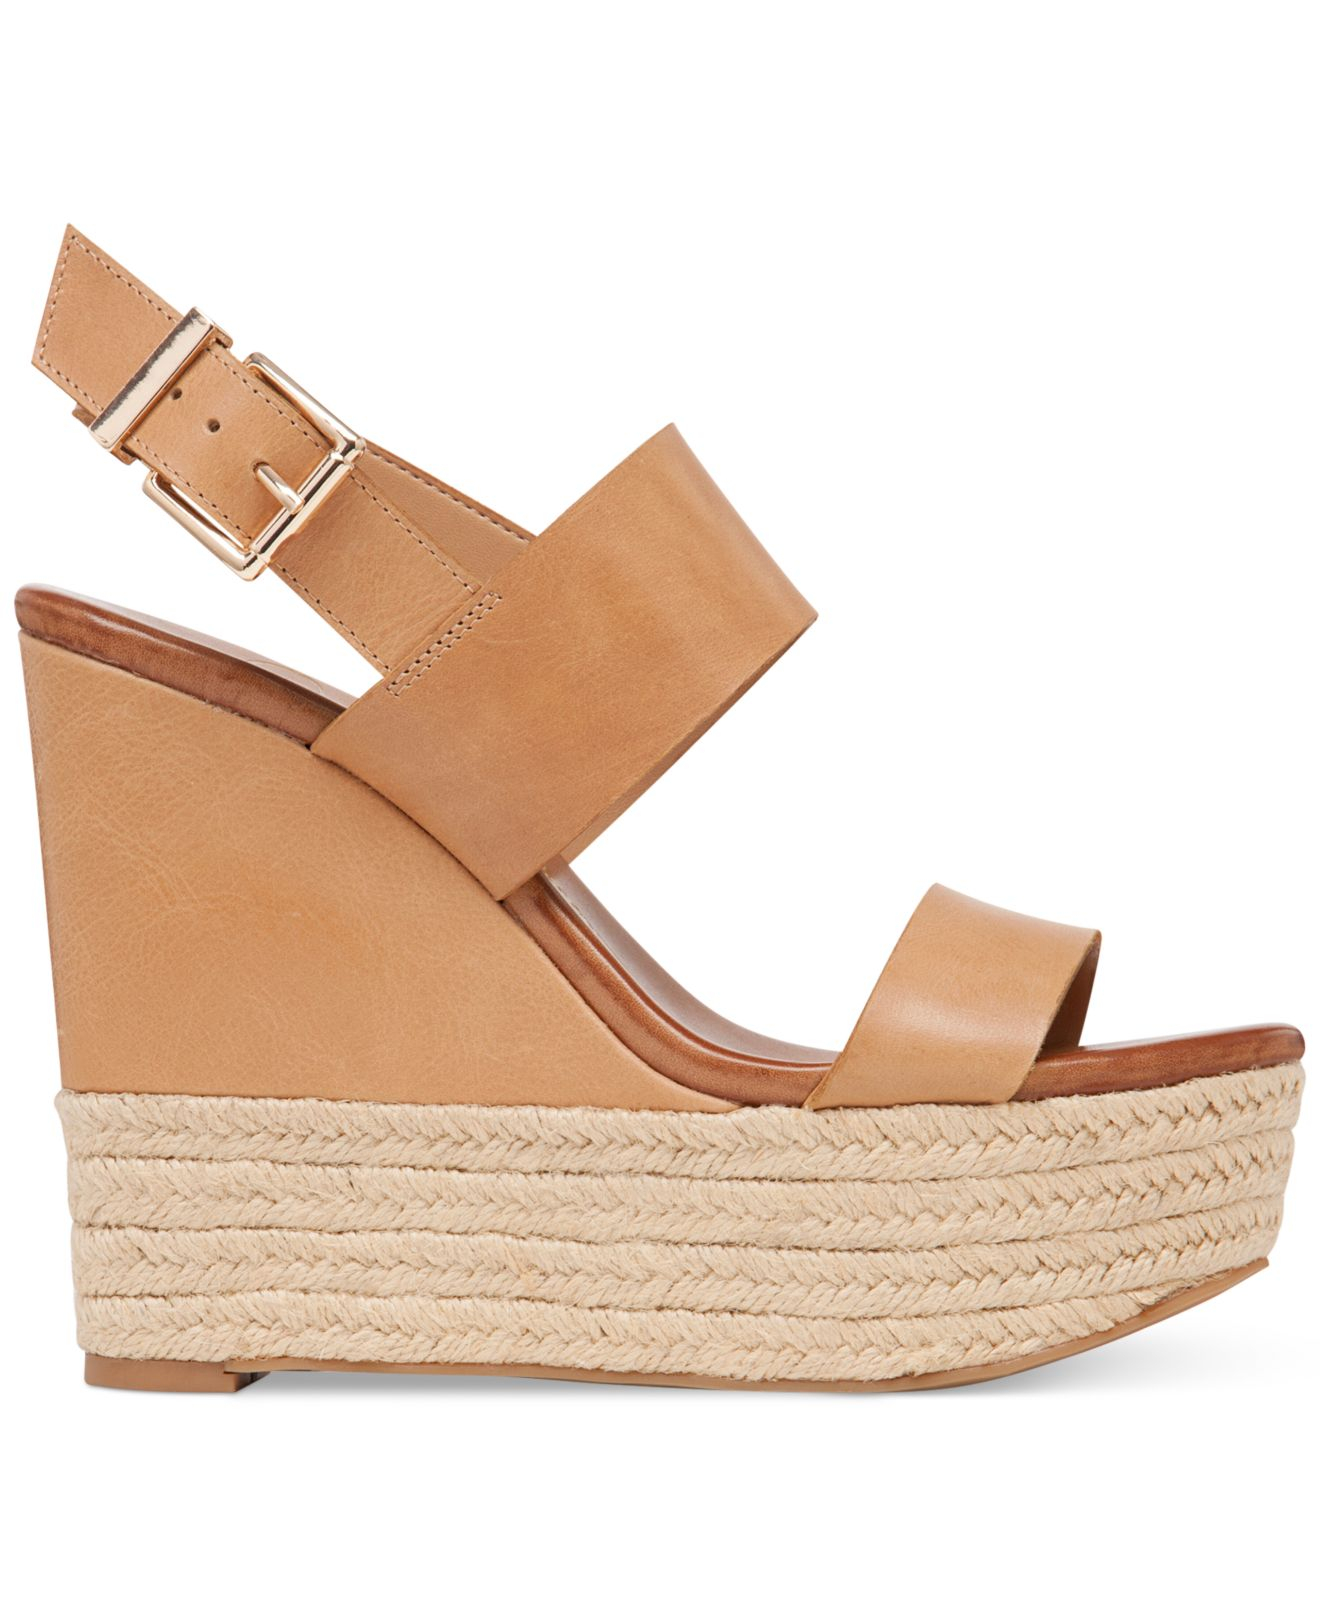 Jessica simpson Allyn Two-piece Slingback Platform Wedge Sandals in ...